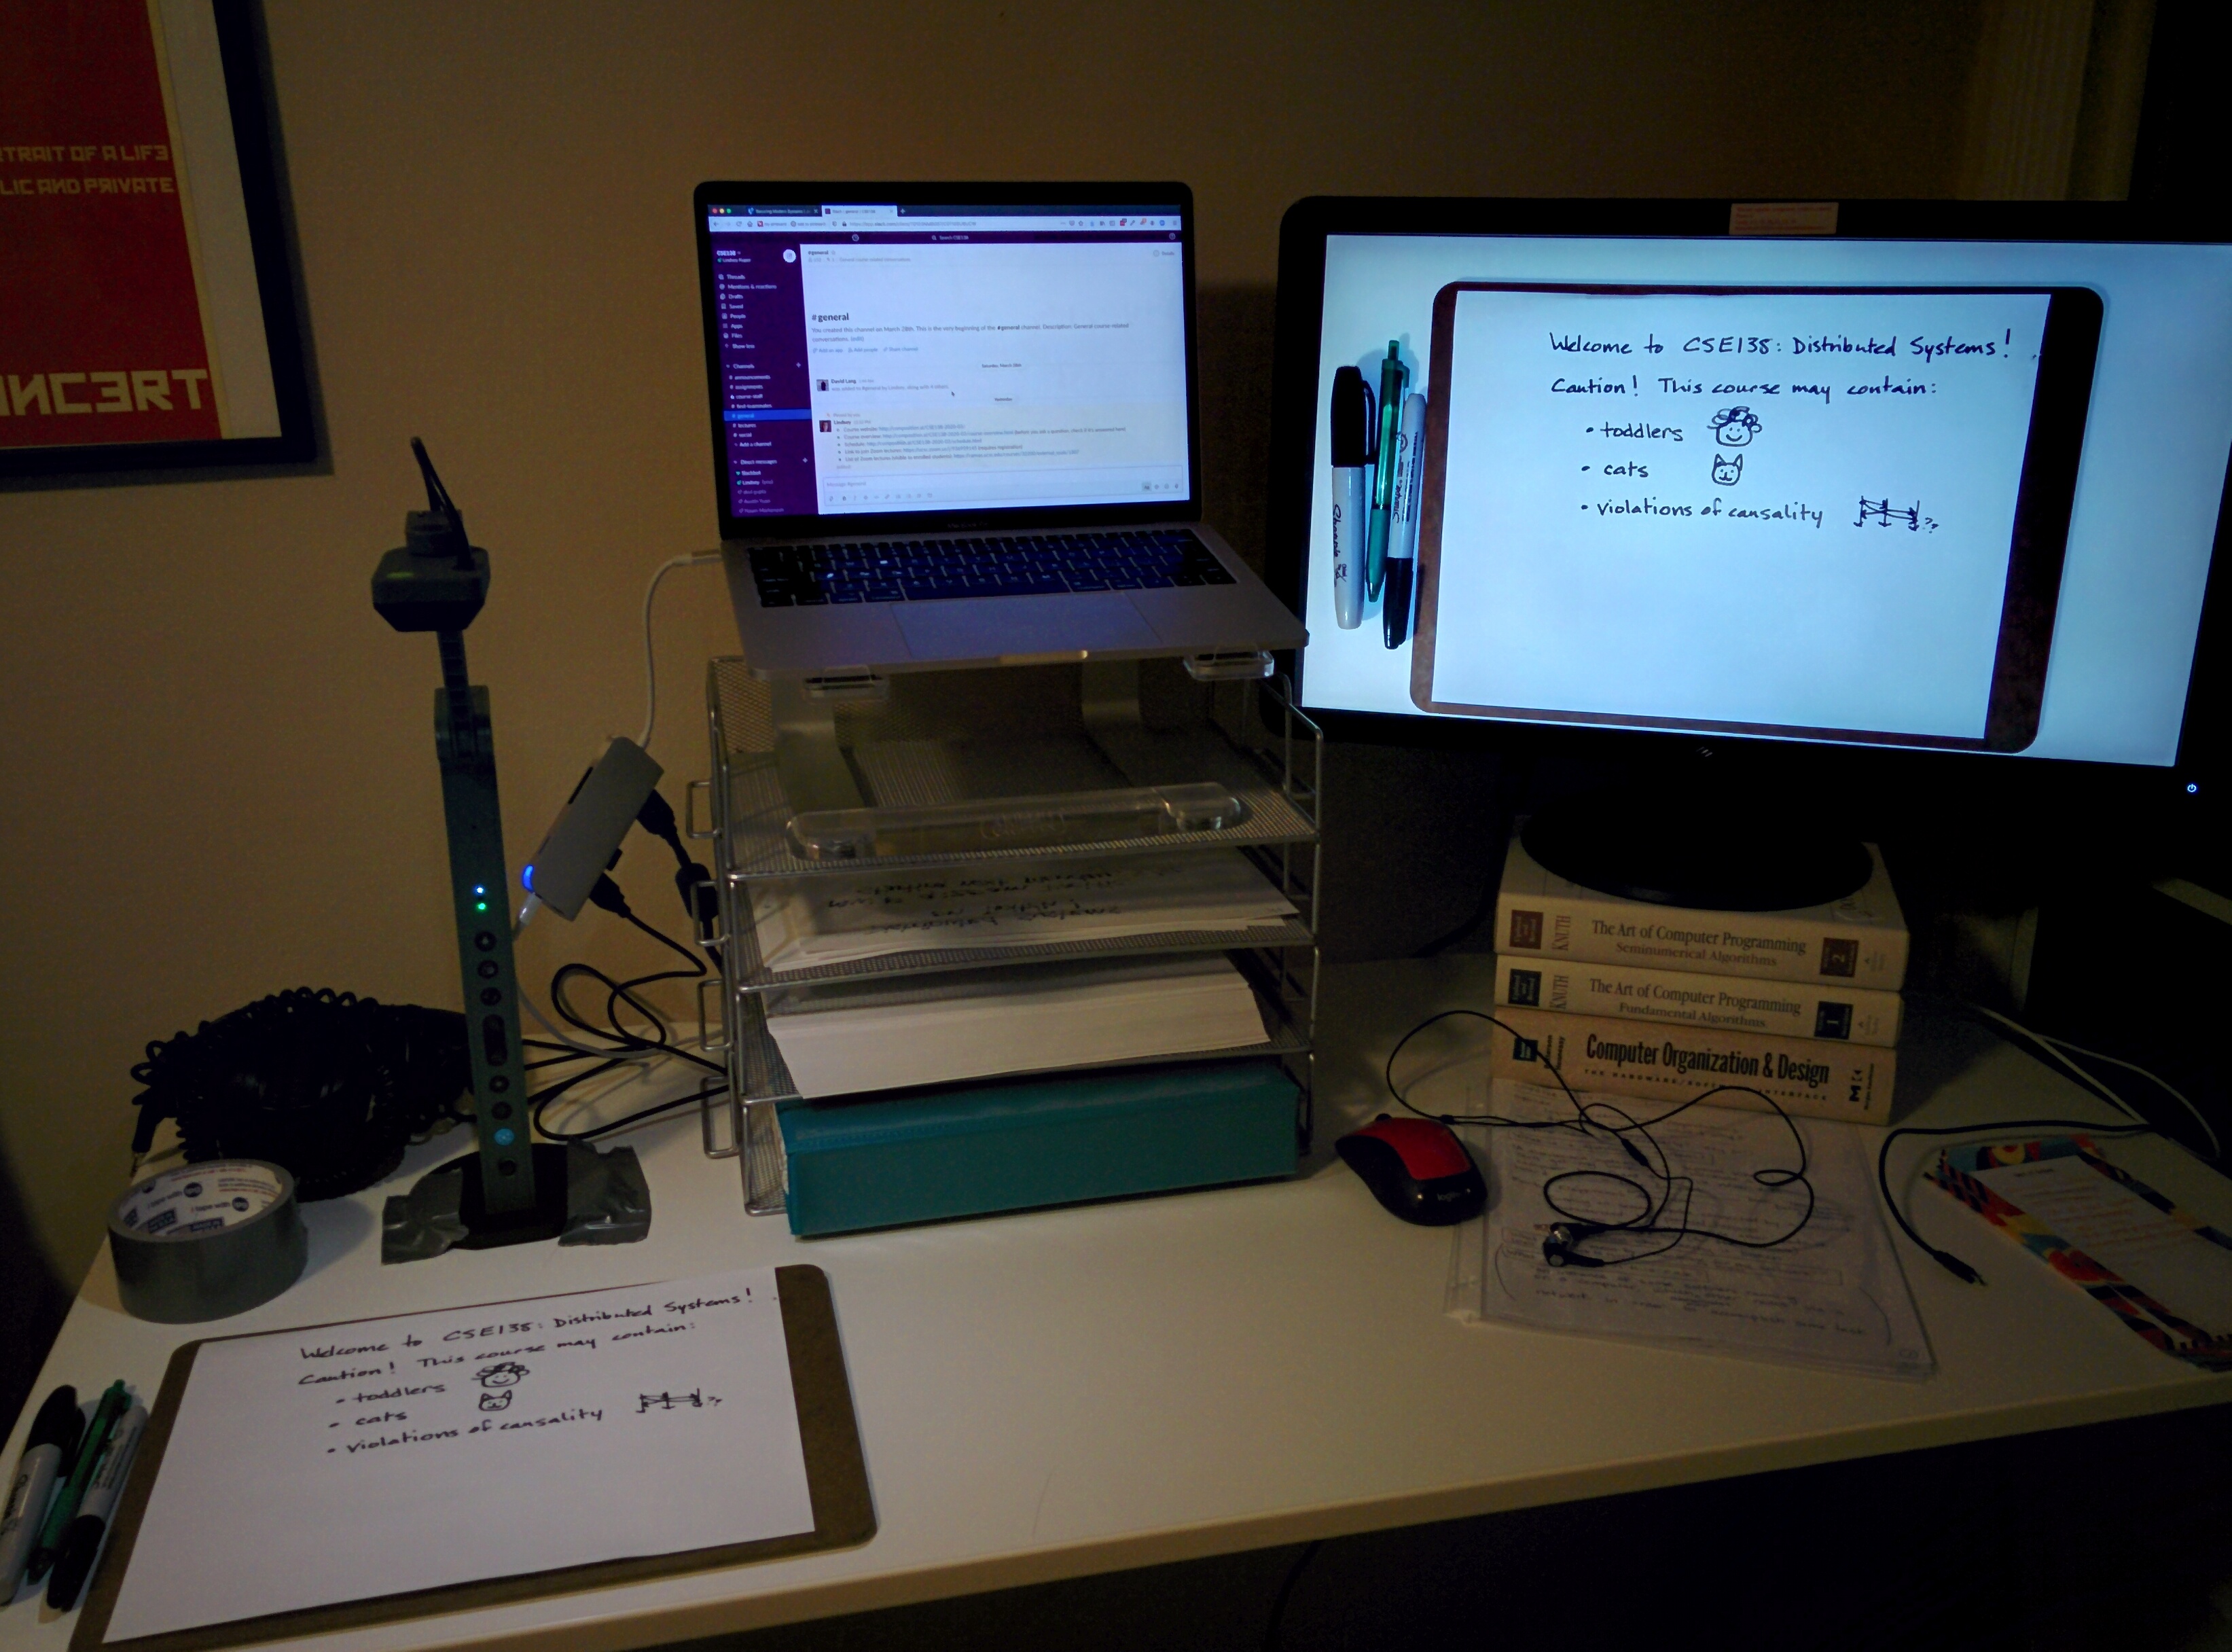 My lecture setup at home.  Note the duct tape holding the document camera in place.